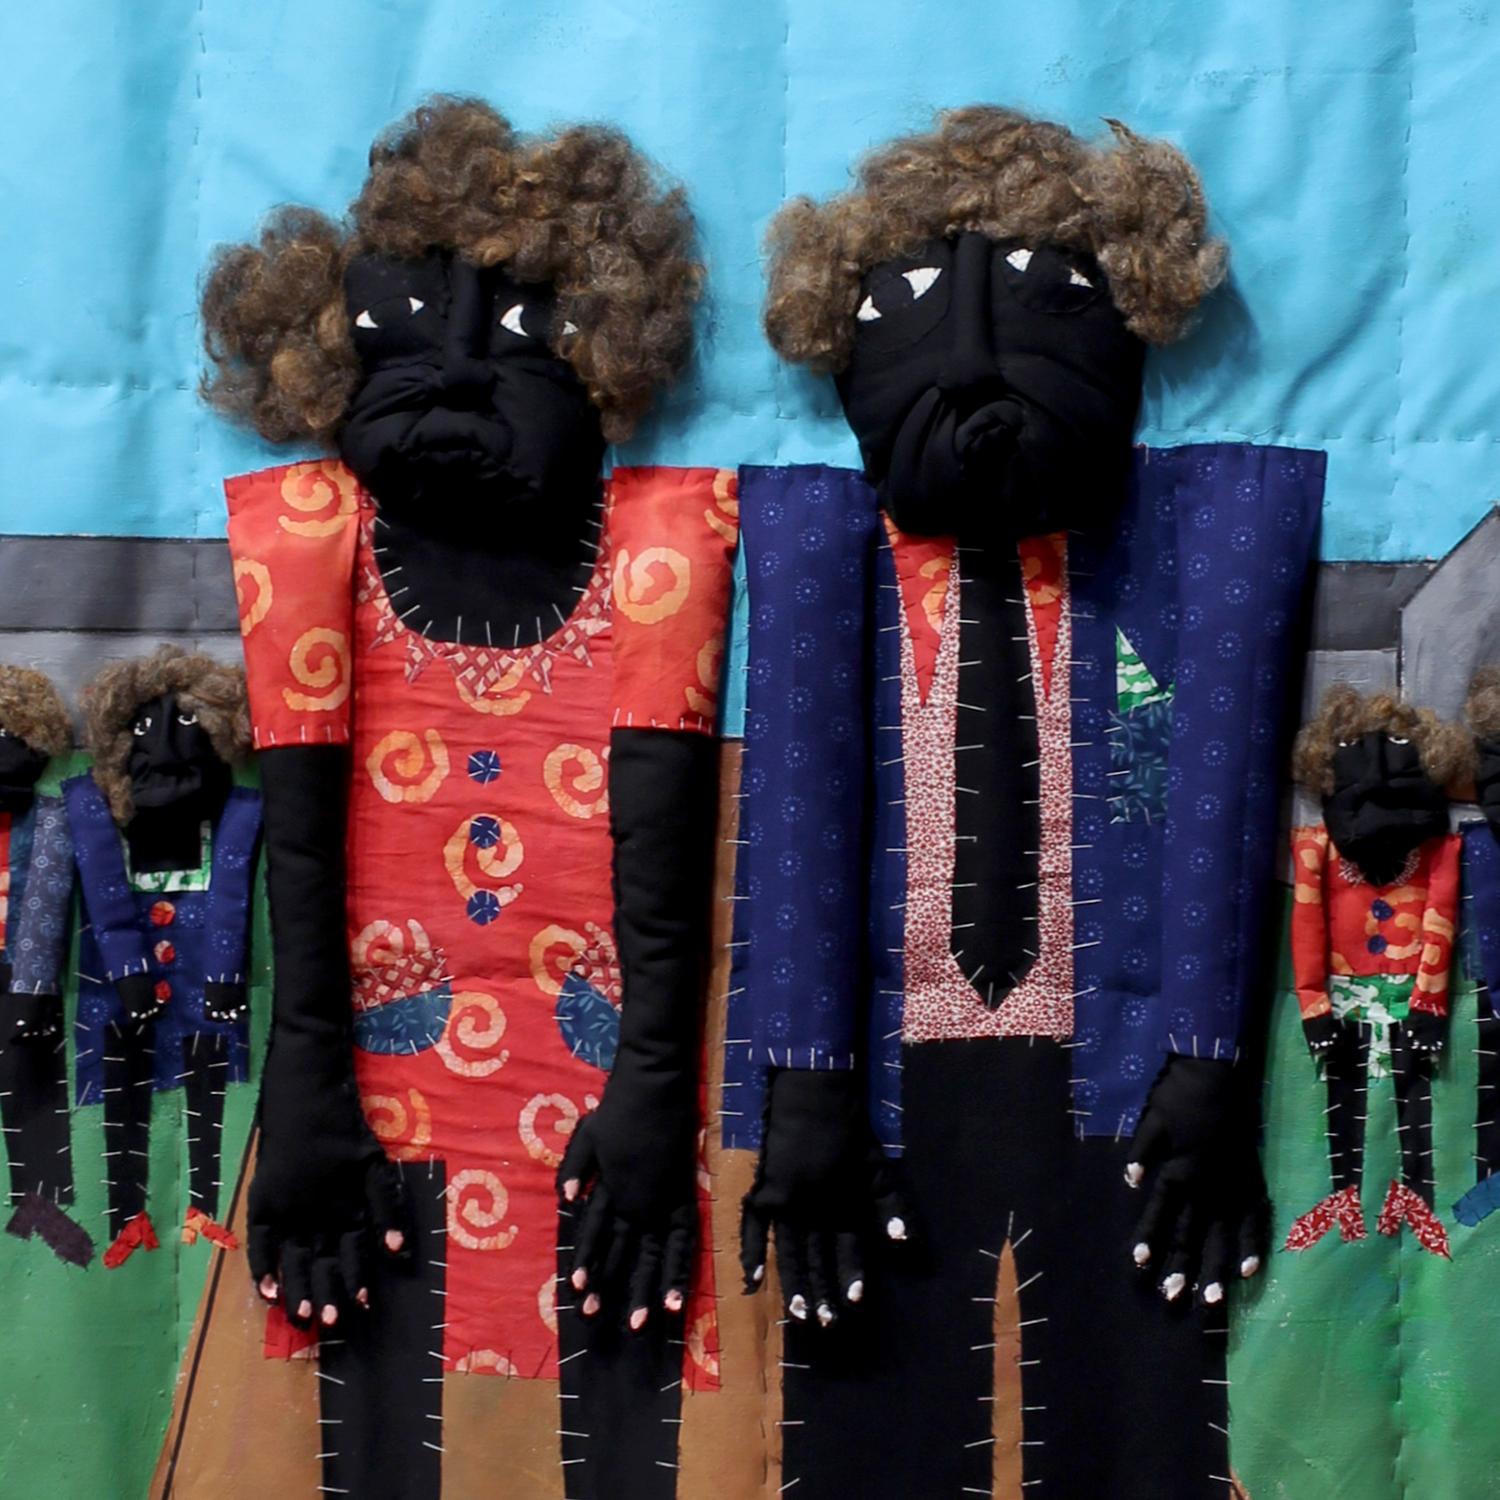 'The Joyous Farewell into the Future' - quilt - Negro Spirituals - figures - Sculpture by Wendell George Brown